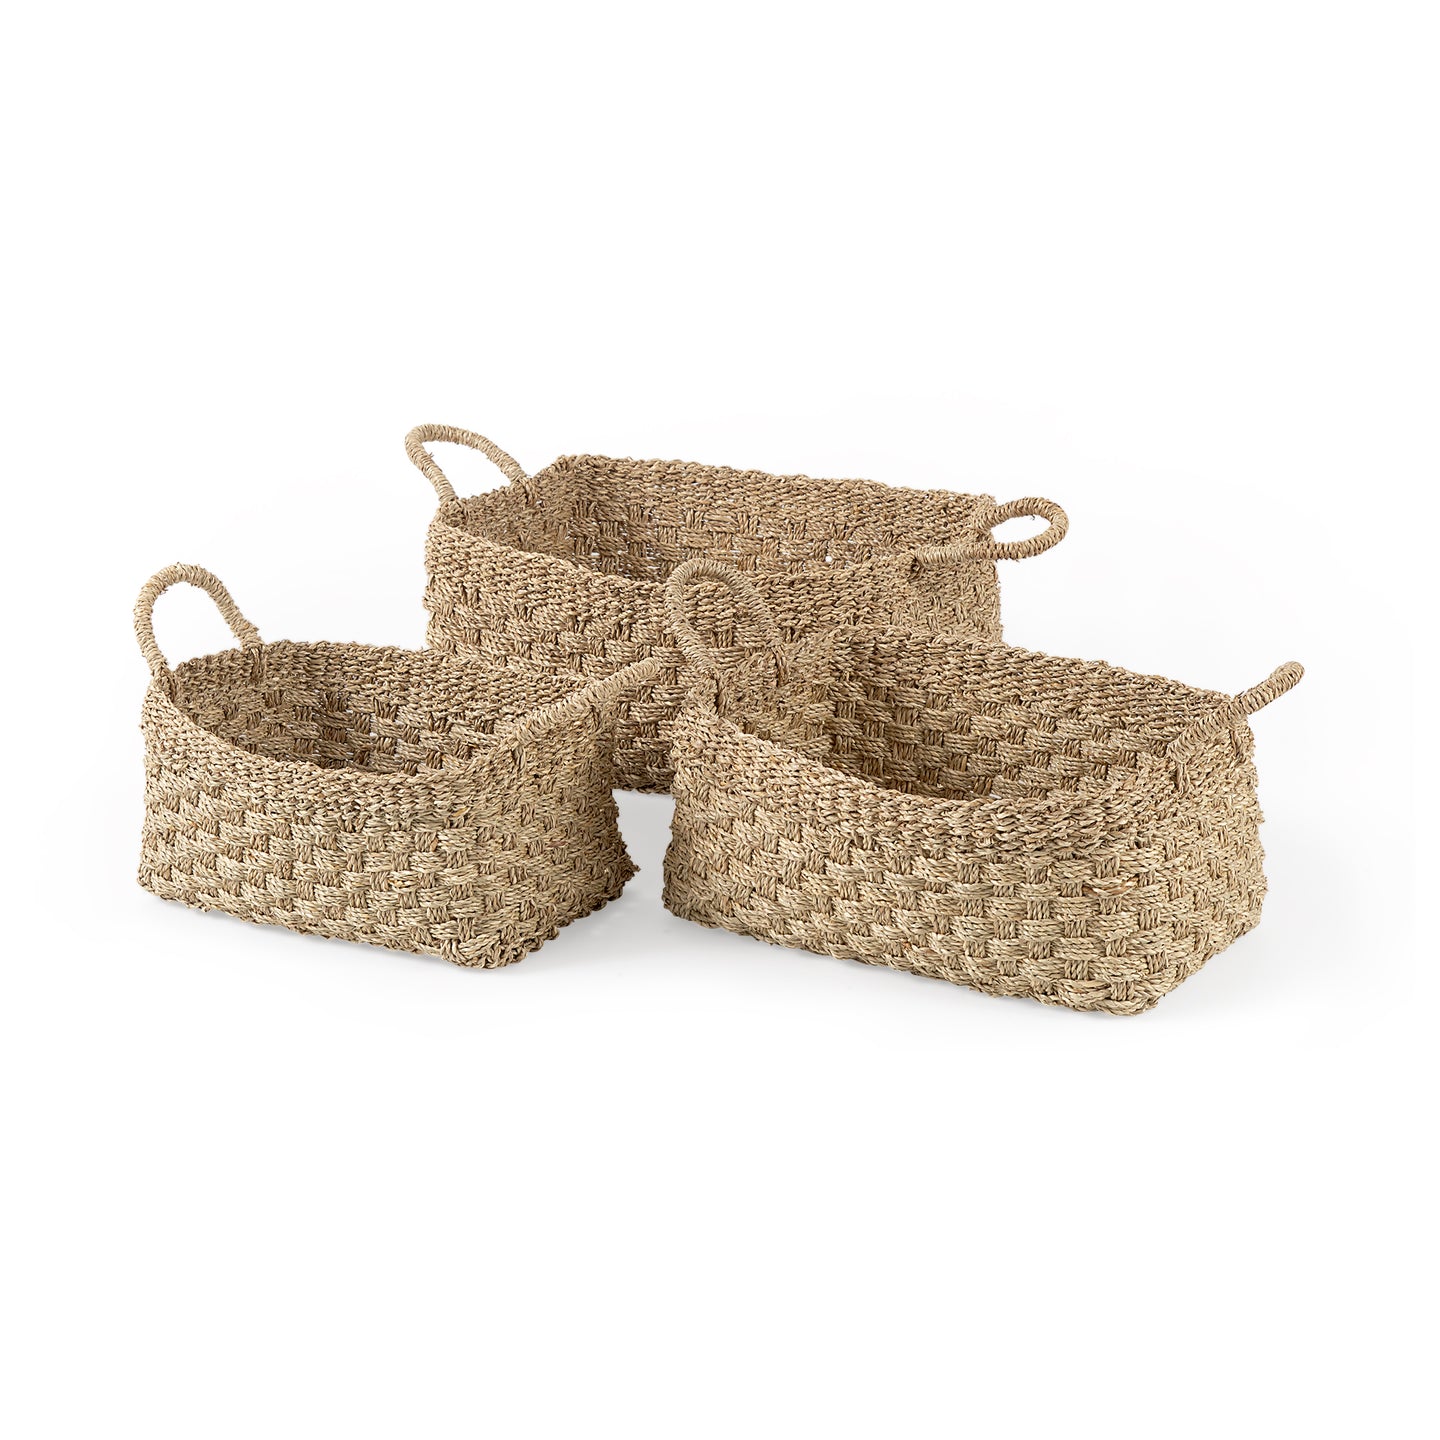 Rectangular Seagrass Baskets with Handles